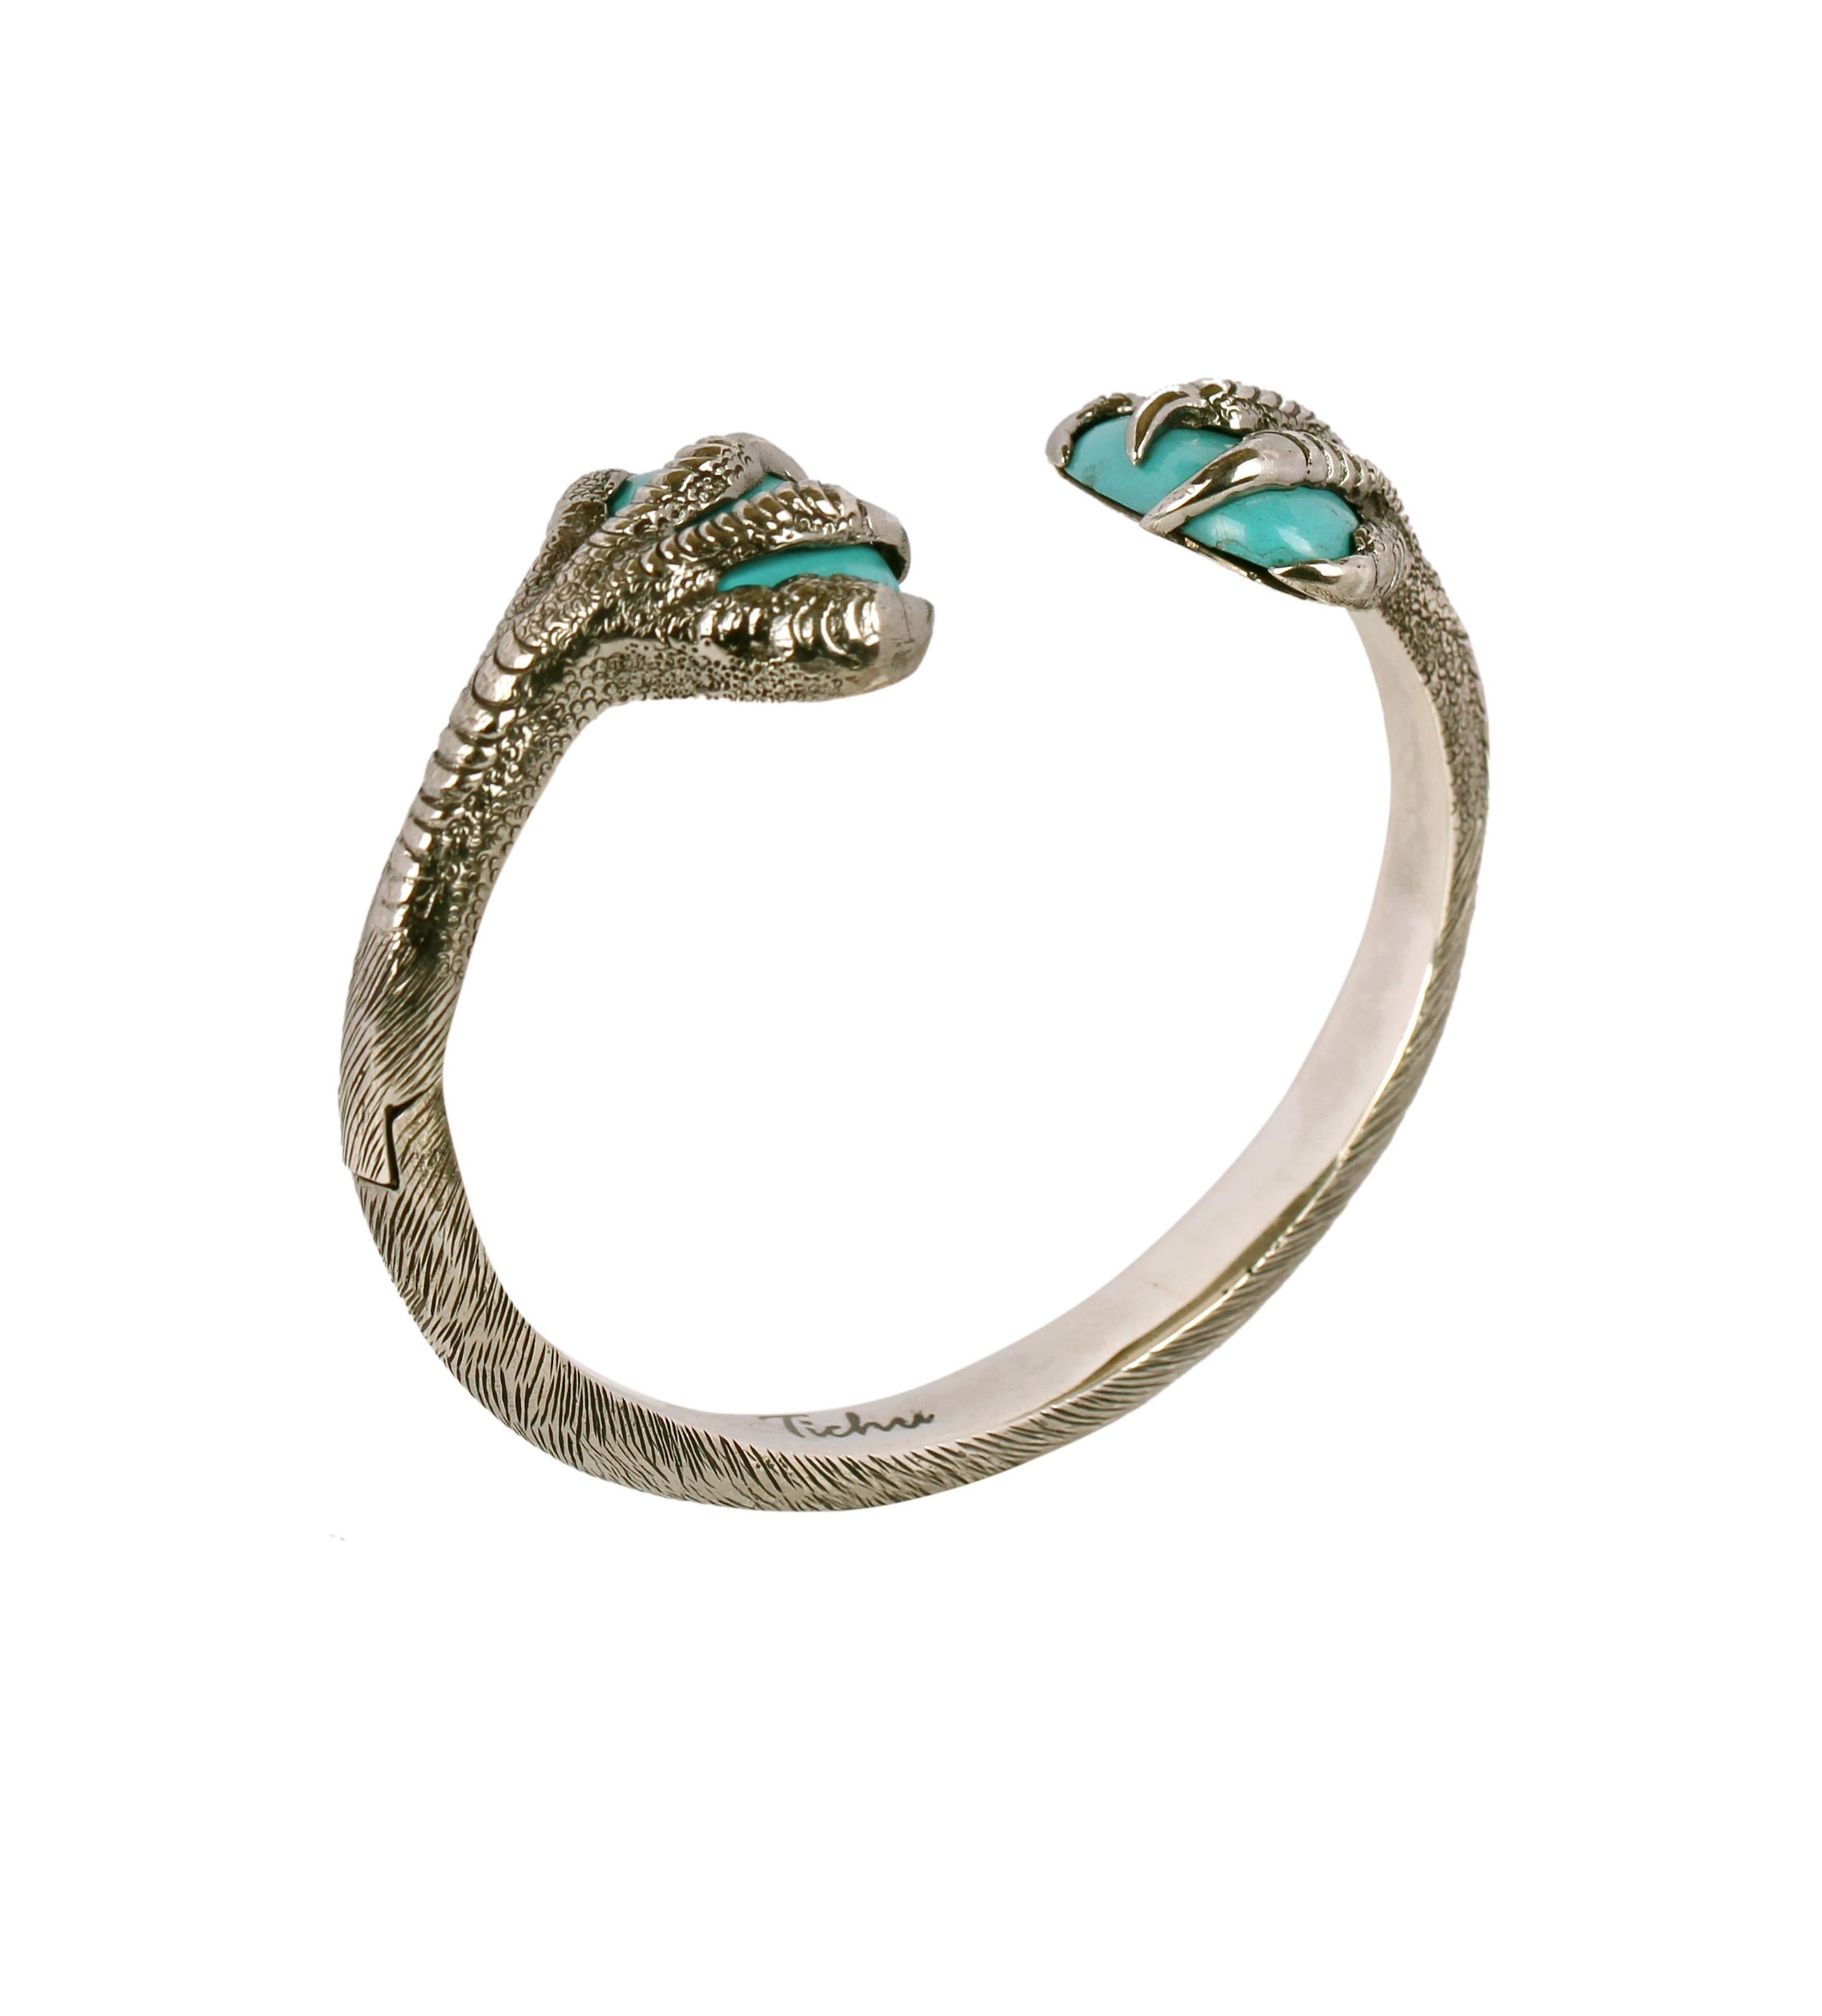 Cabochon Tichu Turquoise Eagle Claw Cuff in Sterling Sliver and Crystal Quartz 'Size M' For Sale